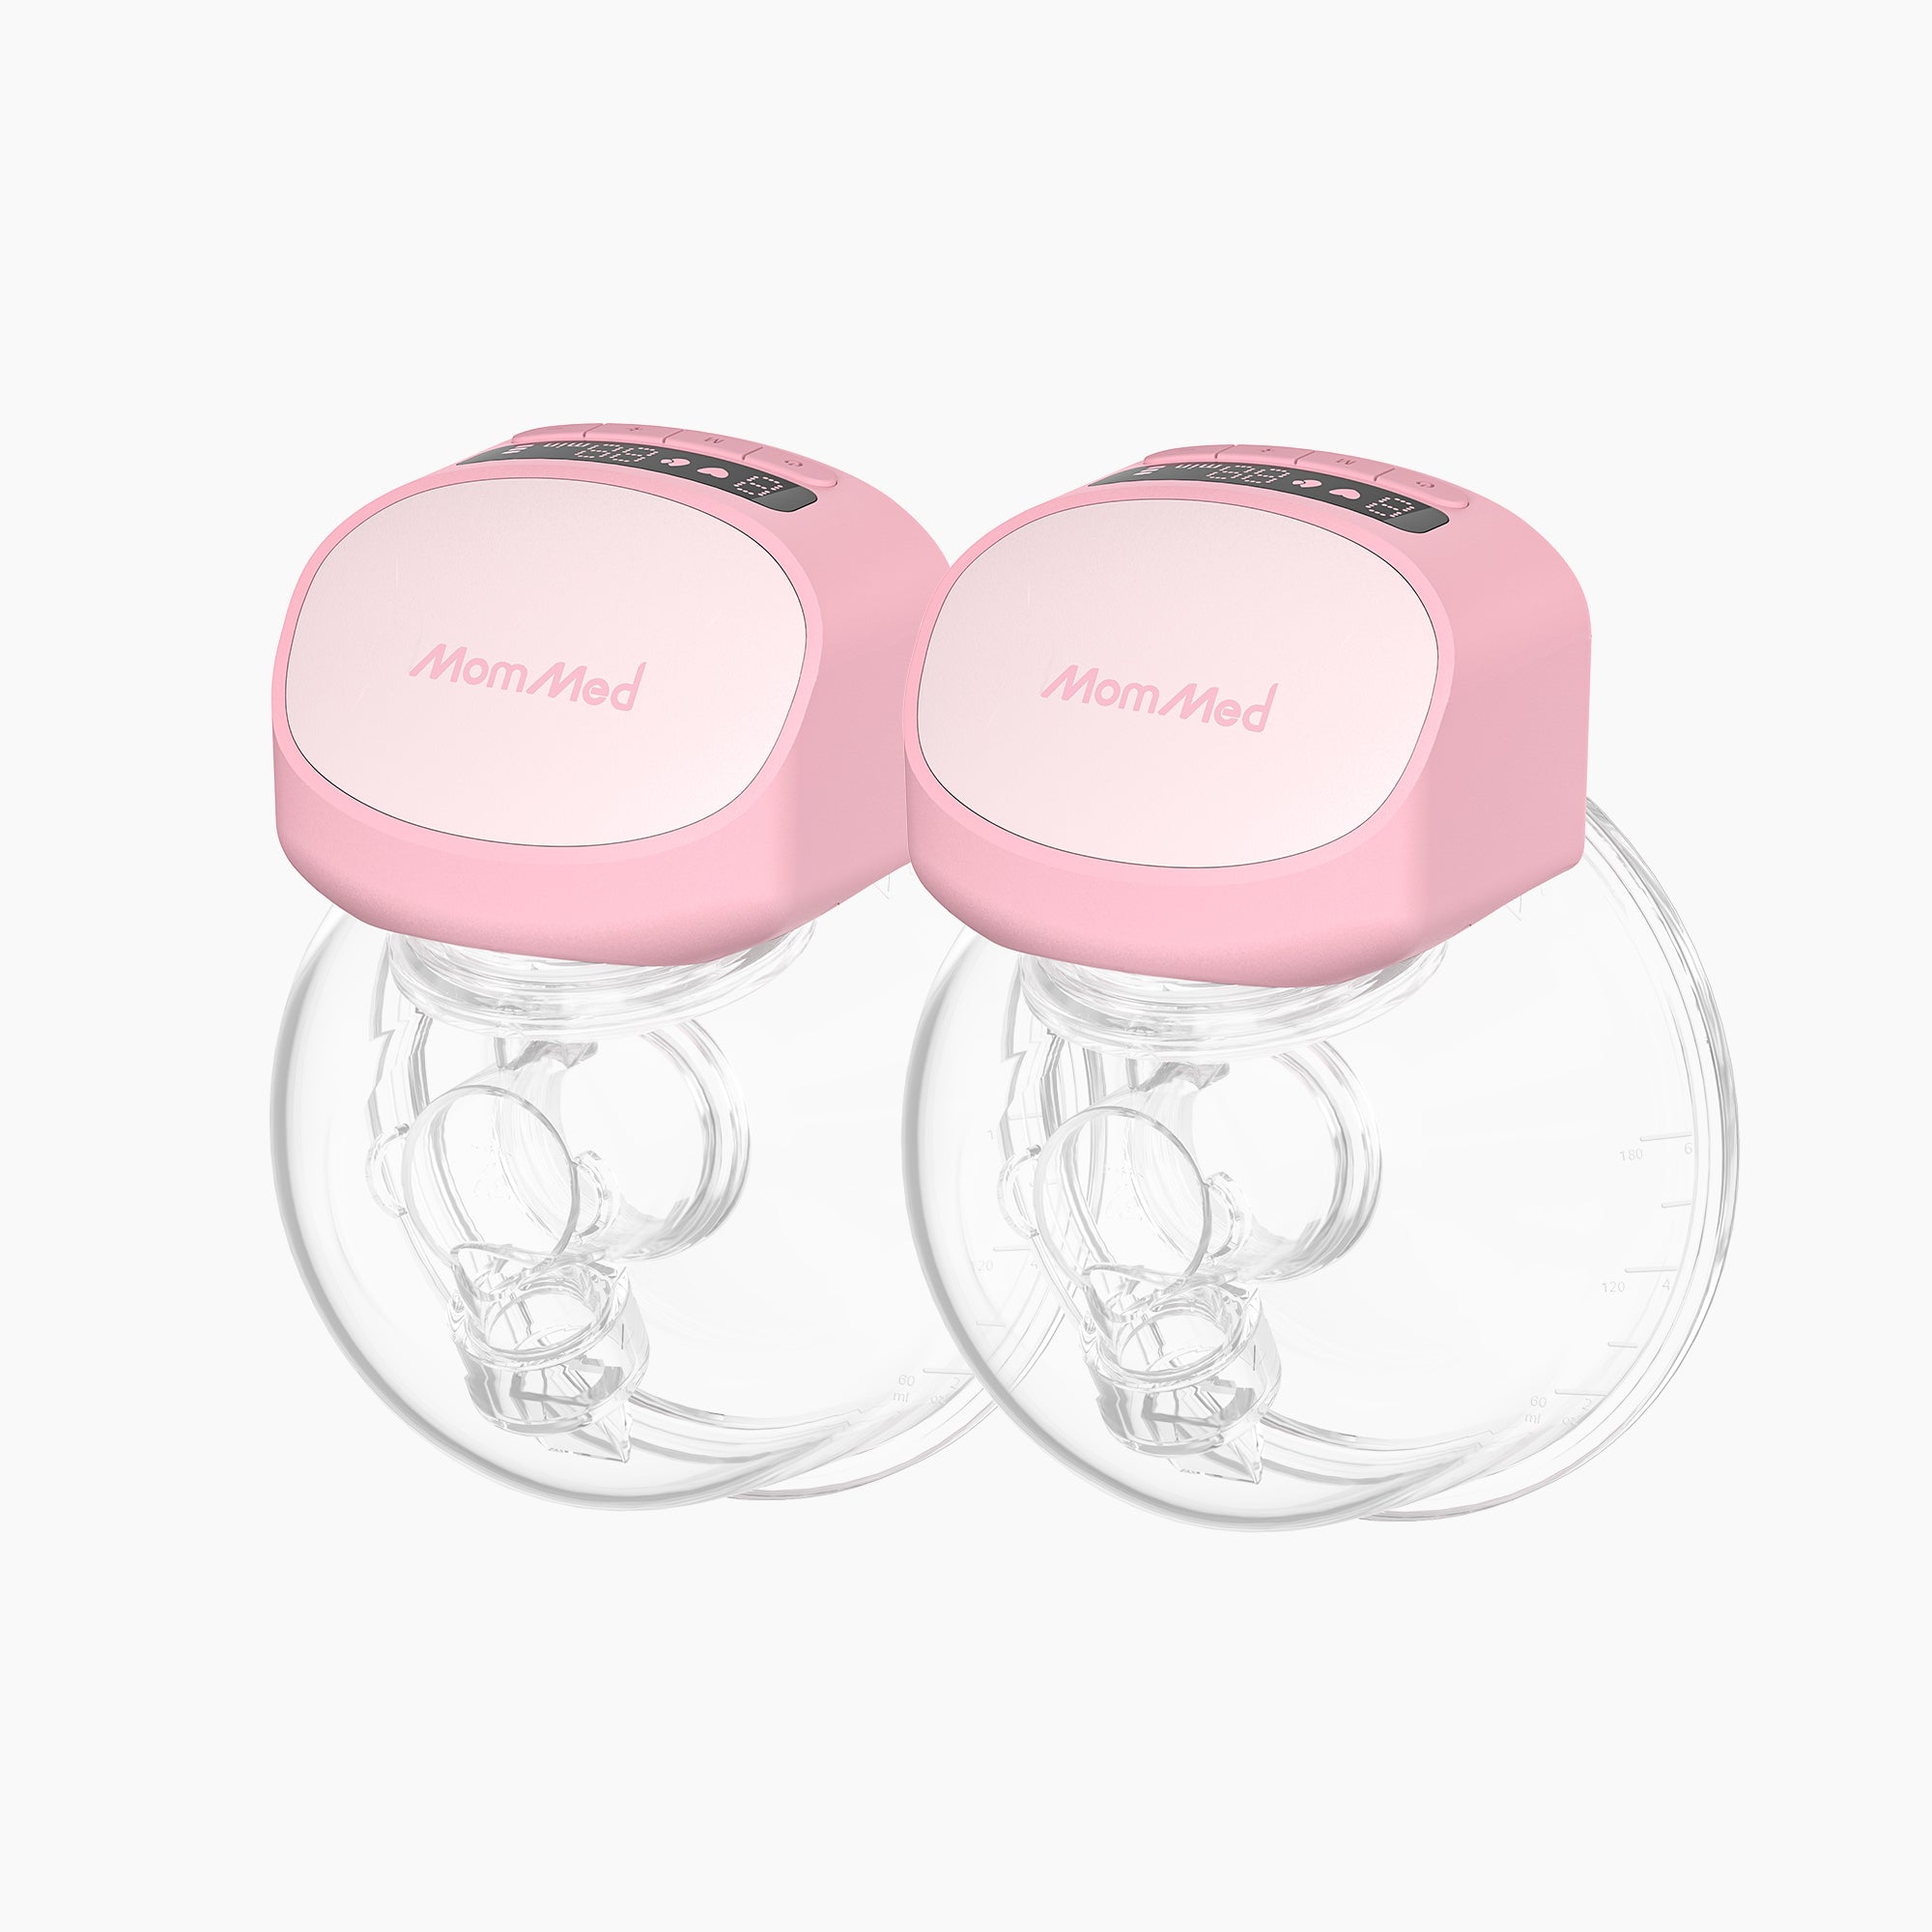 Momcozy S9 Pro Hands-Free Breast Pump LED Display 2 Modes 9 Levels Gray 2  Pack